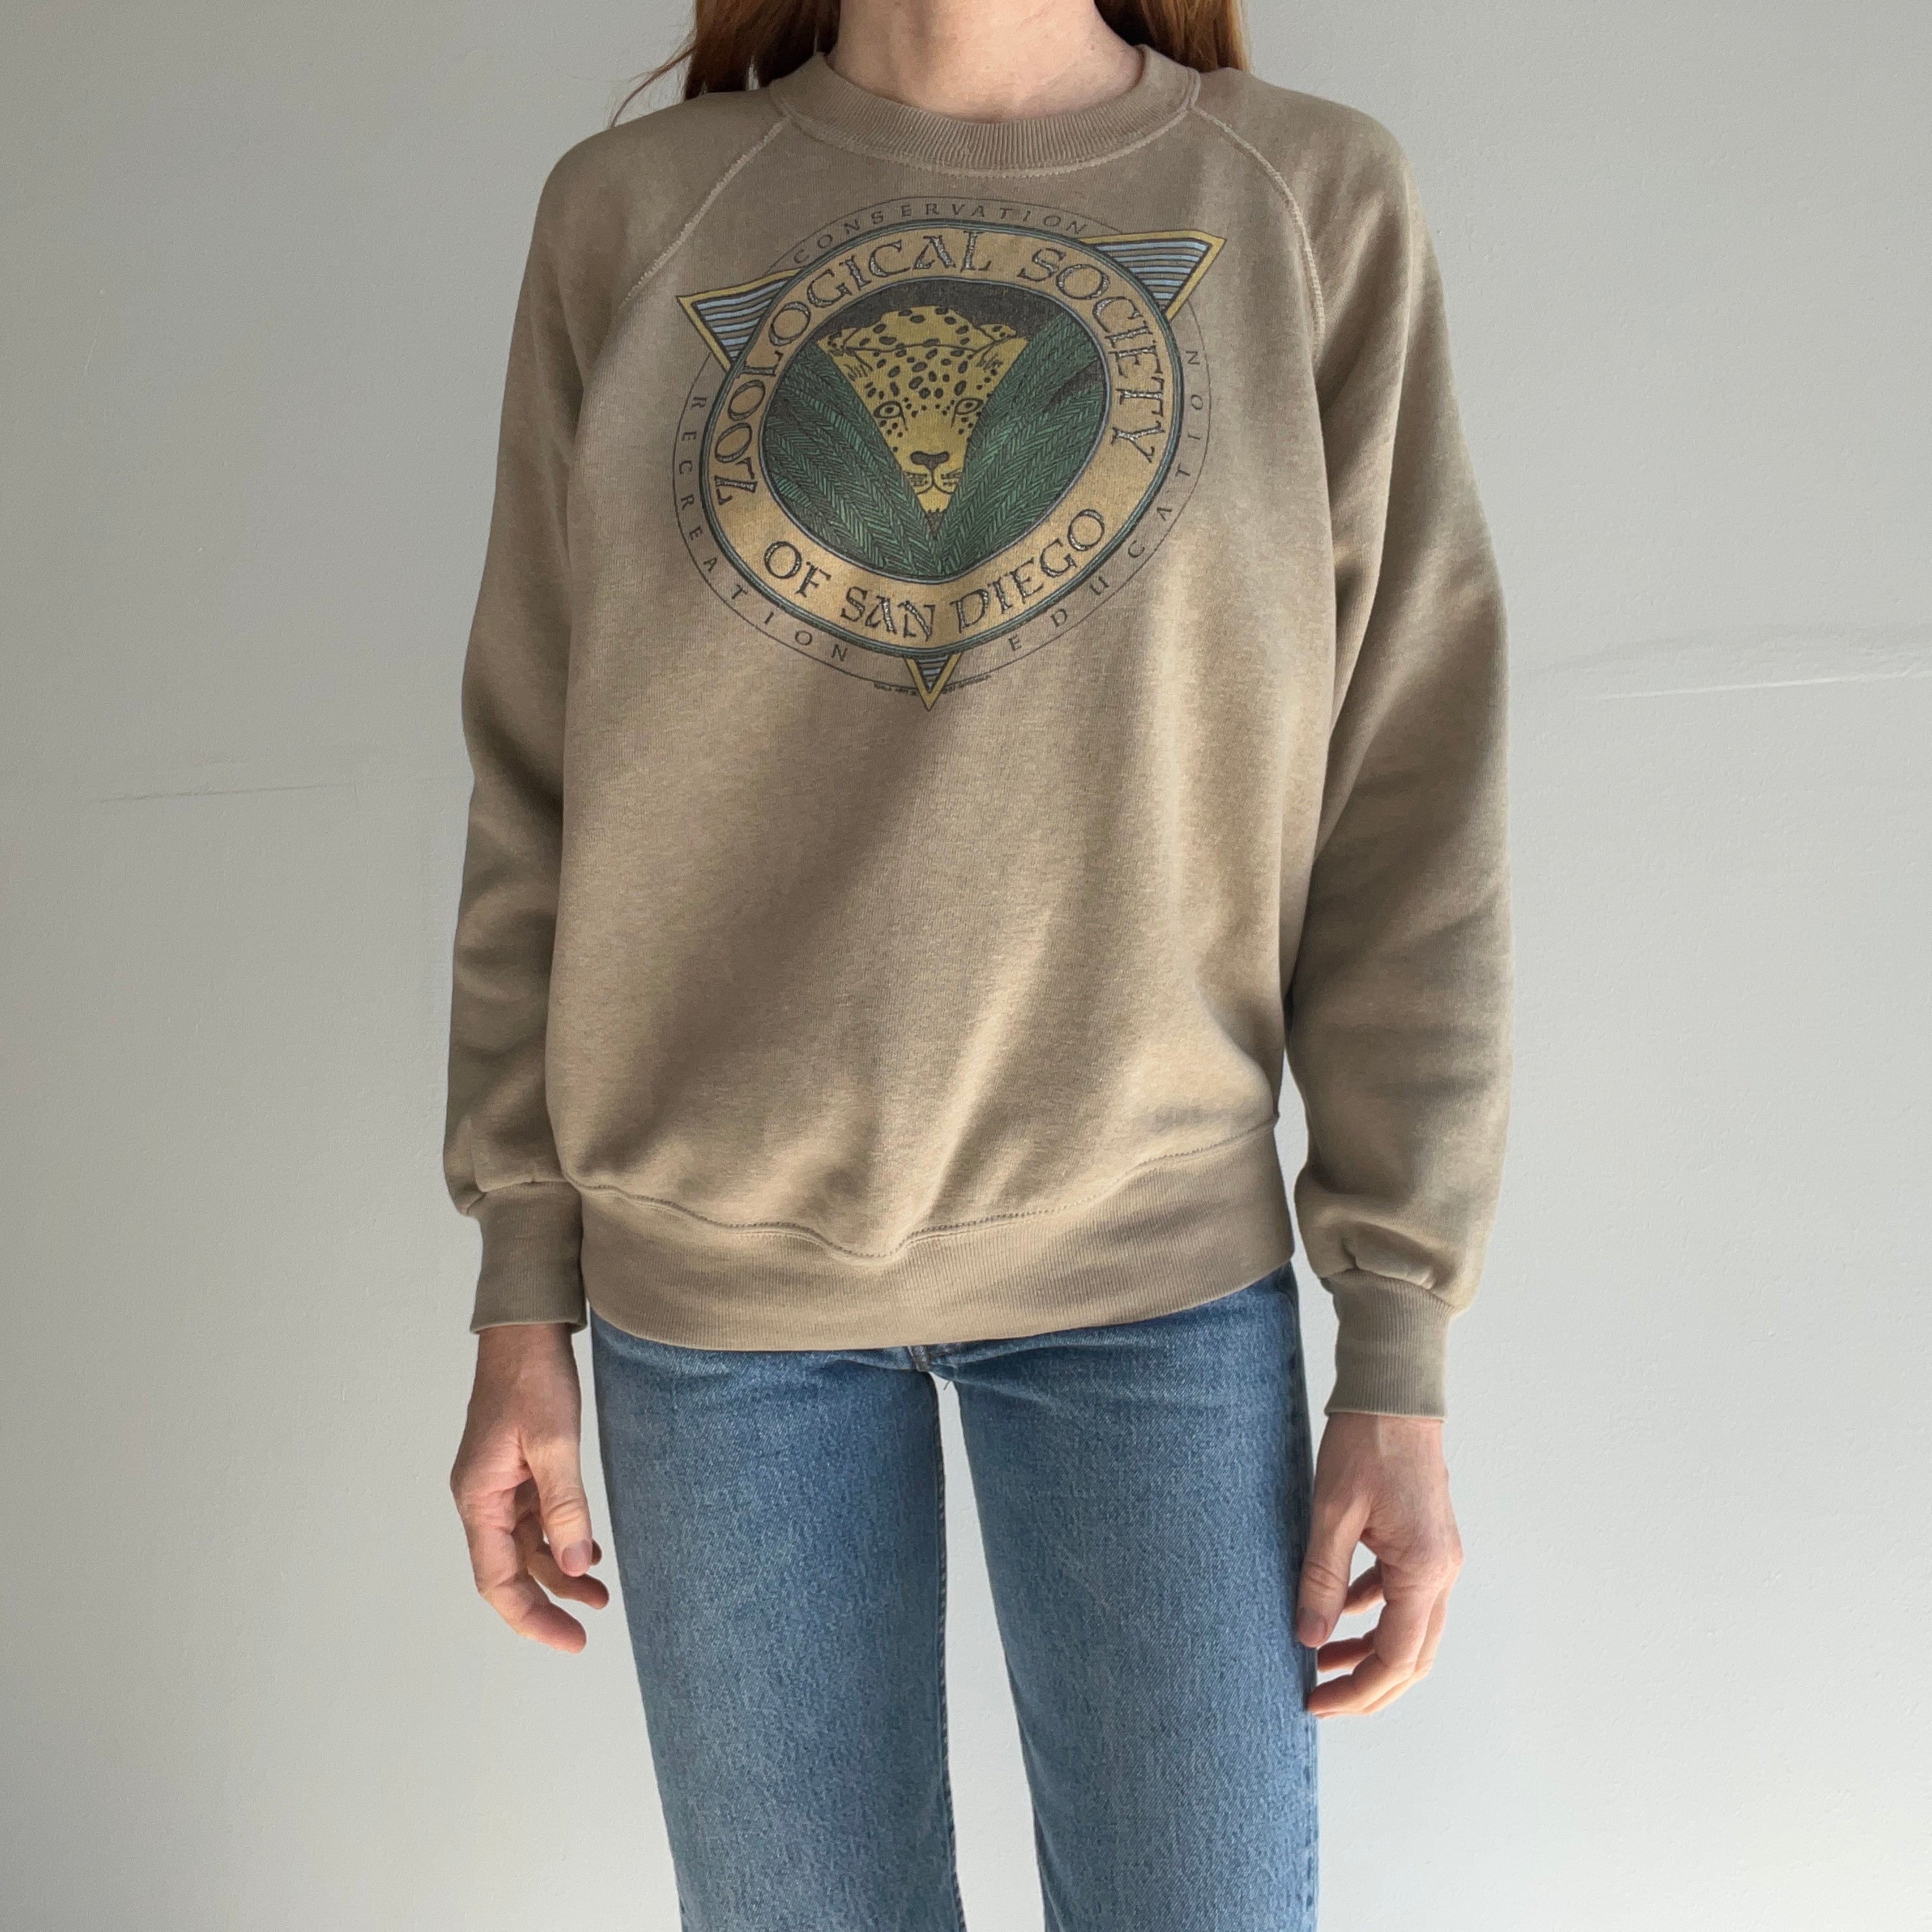 1987 Zoological Society of San Diego Sweatshirt with Mending